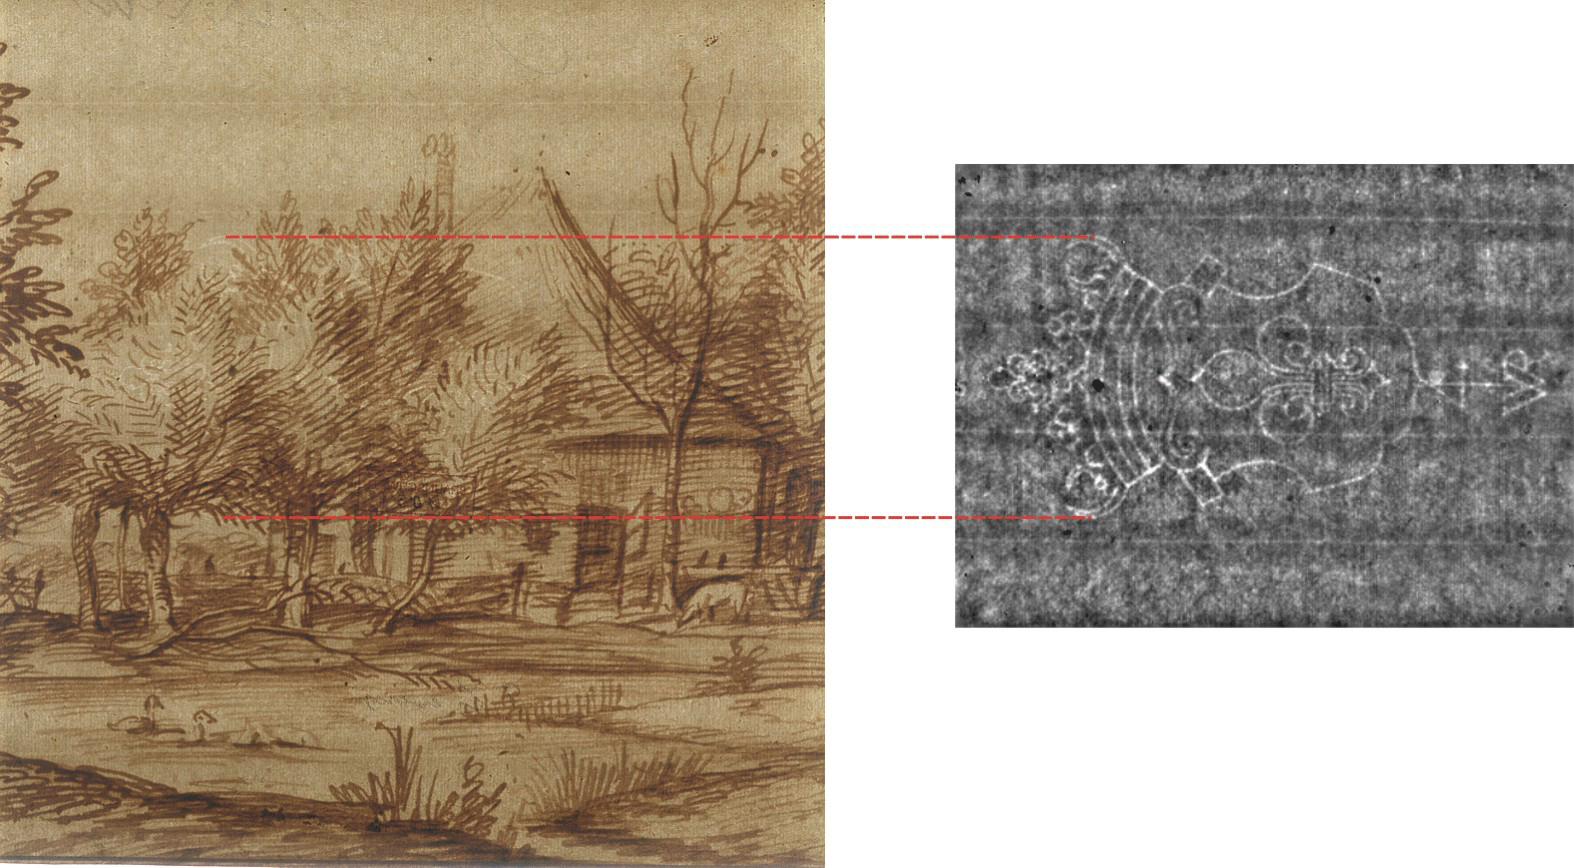 Image of a watermark (above) from a Rembrandt sketch (below) taken by the imaging team: Dr. Volker Märgner of TU Braunschweig; Prof. Thomas Döring, director of the print collection at the Herzog Anton Ulrich-Museum in Braunschweig; and Peter Meinlschmidt of Fraunhofer WKI.